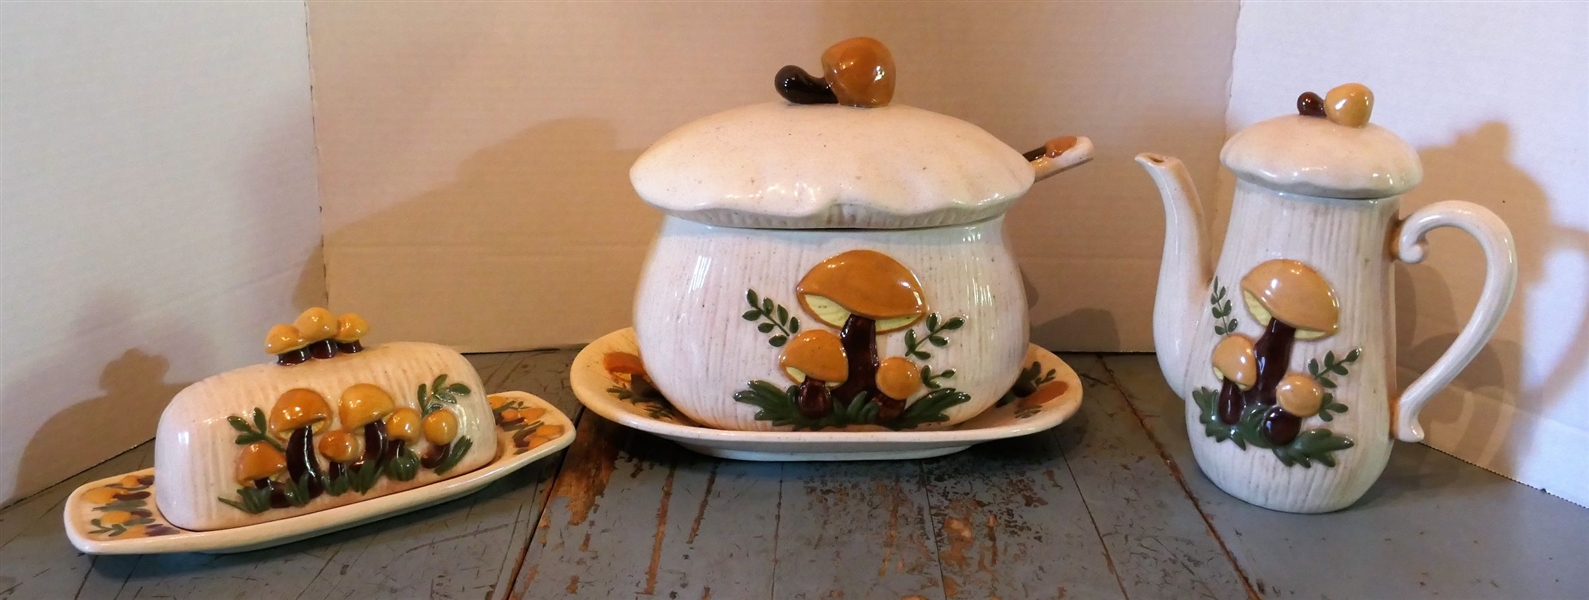 3 Pieces of Mushroom Kitchenware including Tureen with Under plate and Ladle, Coffee Pot, and Butter Dish - Pot Measures 8 1/2" Tall, Tureen 8" 